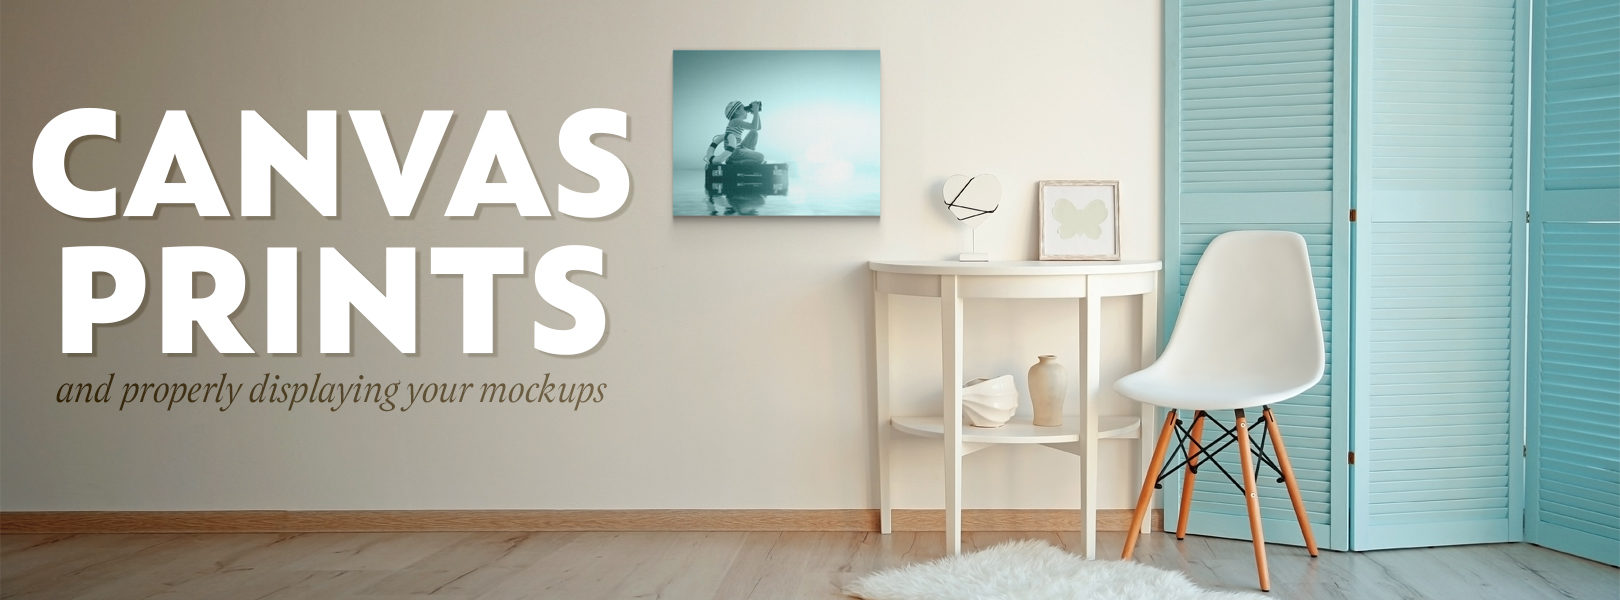 Download Canvas Prints And Properly Displaying Your Mockups Teelaunch Blog PSD Mockup Templates